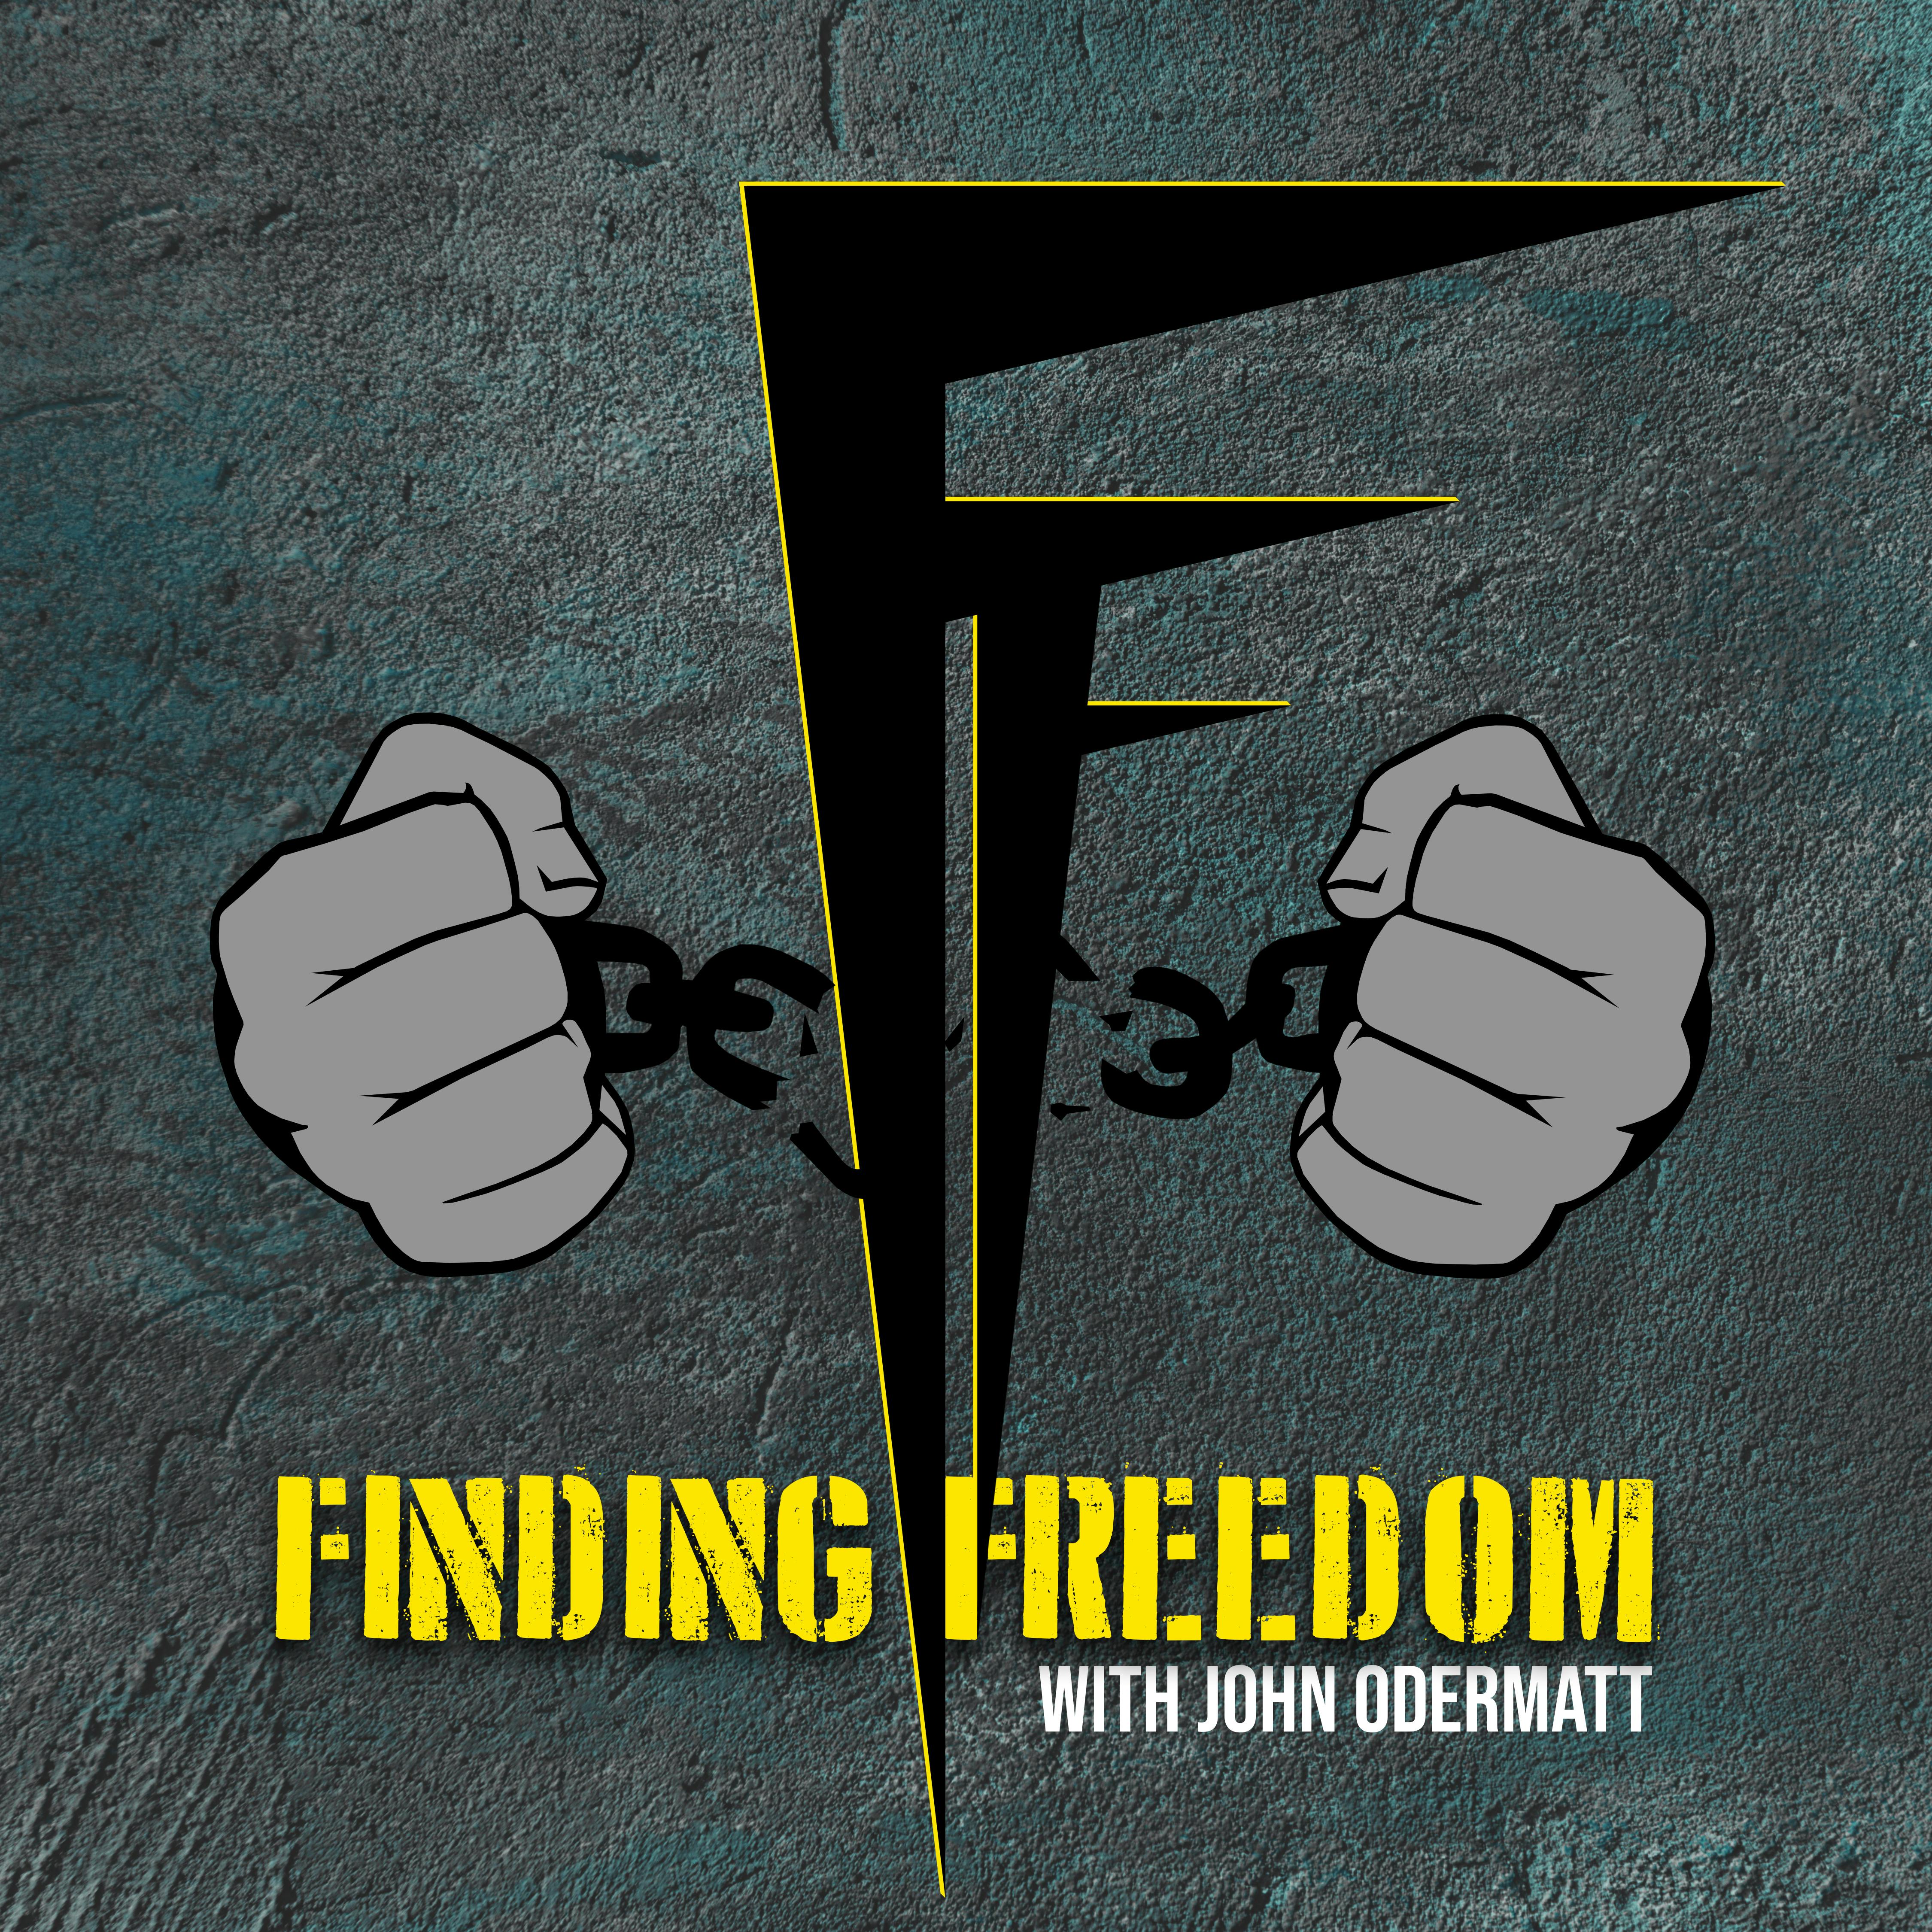 FF 424: The Battle for 3D Printed Gun Freedom with Jessica Solce